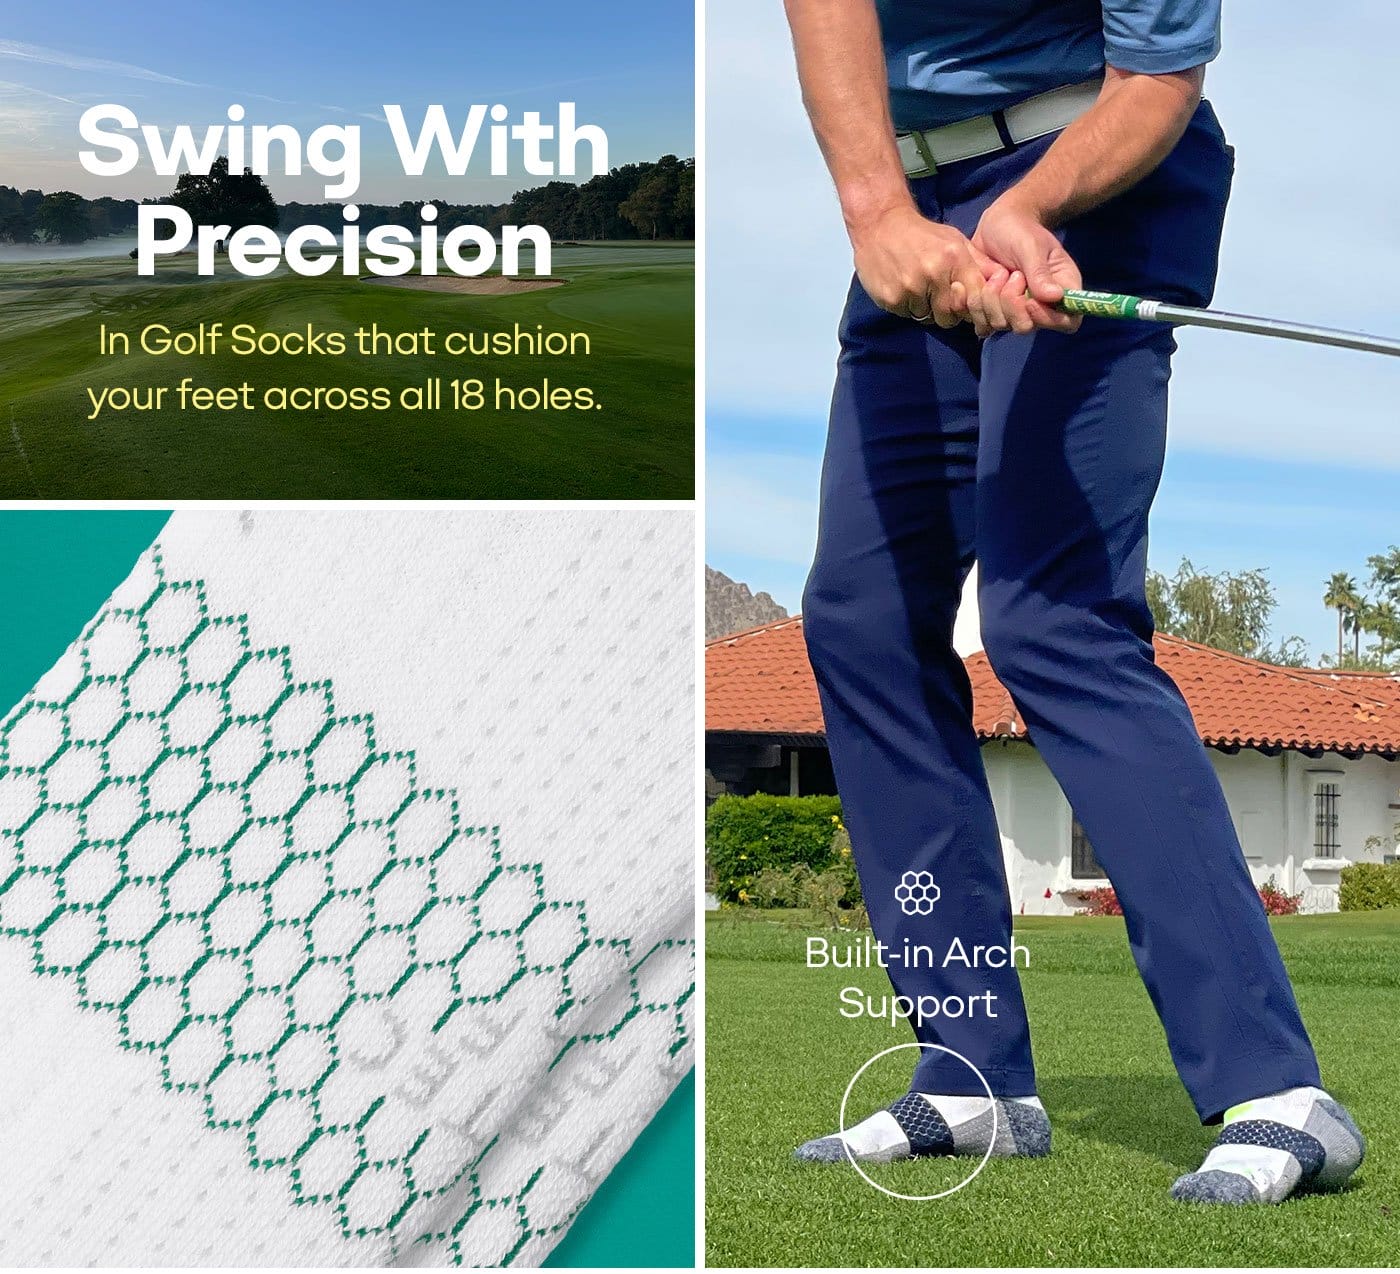 Swing With Precision | In Golf Socks that cushion your feet across all 18 holes.